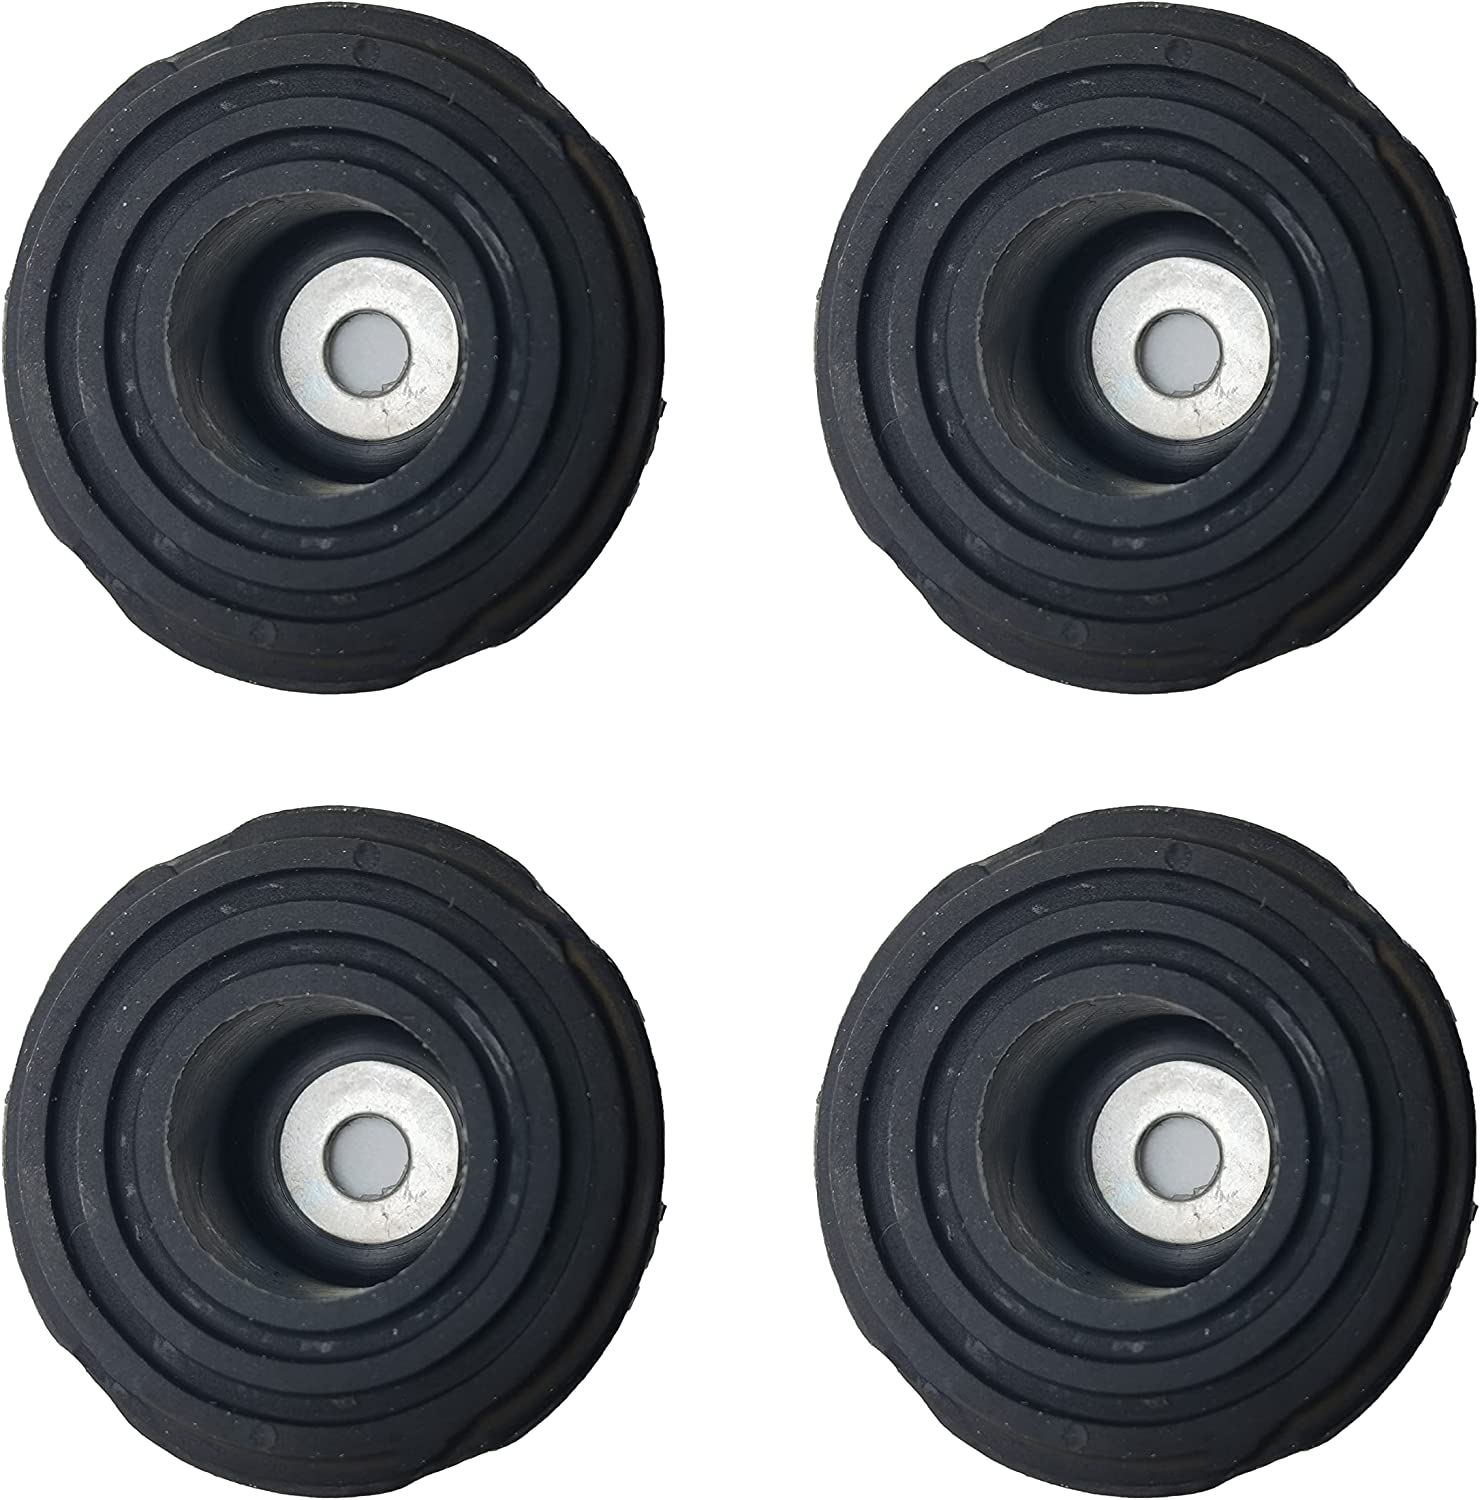 4PCS 68325-Z07-003 Lower Rubber Foot Pads, Compatible with Honda EB2000i & EU2000i, Fits Generator Lower Foot Rubber for EU2200 and EB2200 – Replace 68325-Z39-C90, 68325-Z44-A30